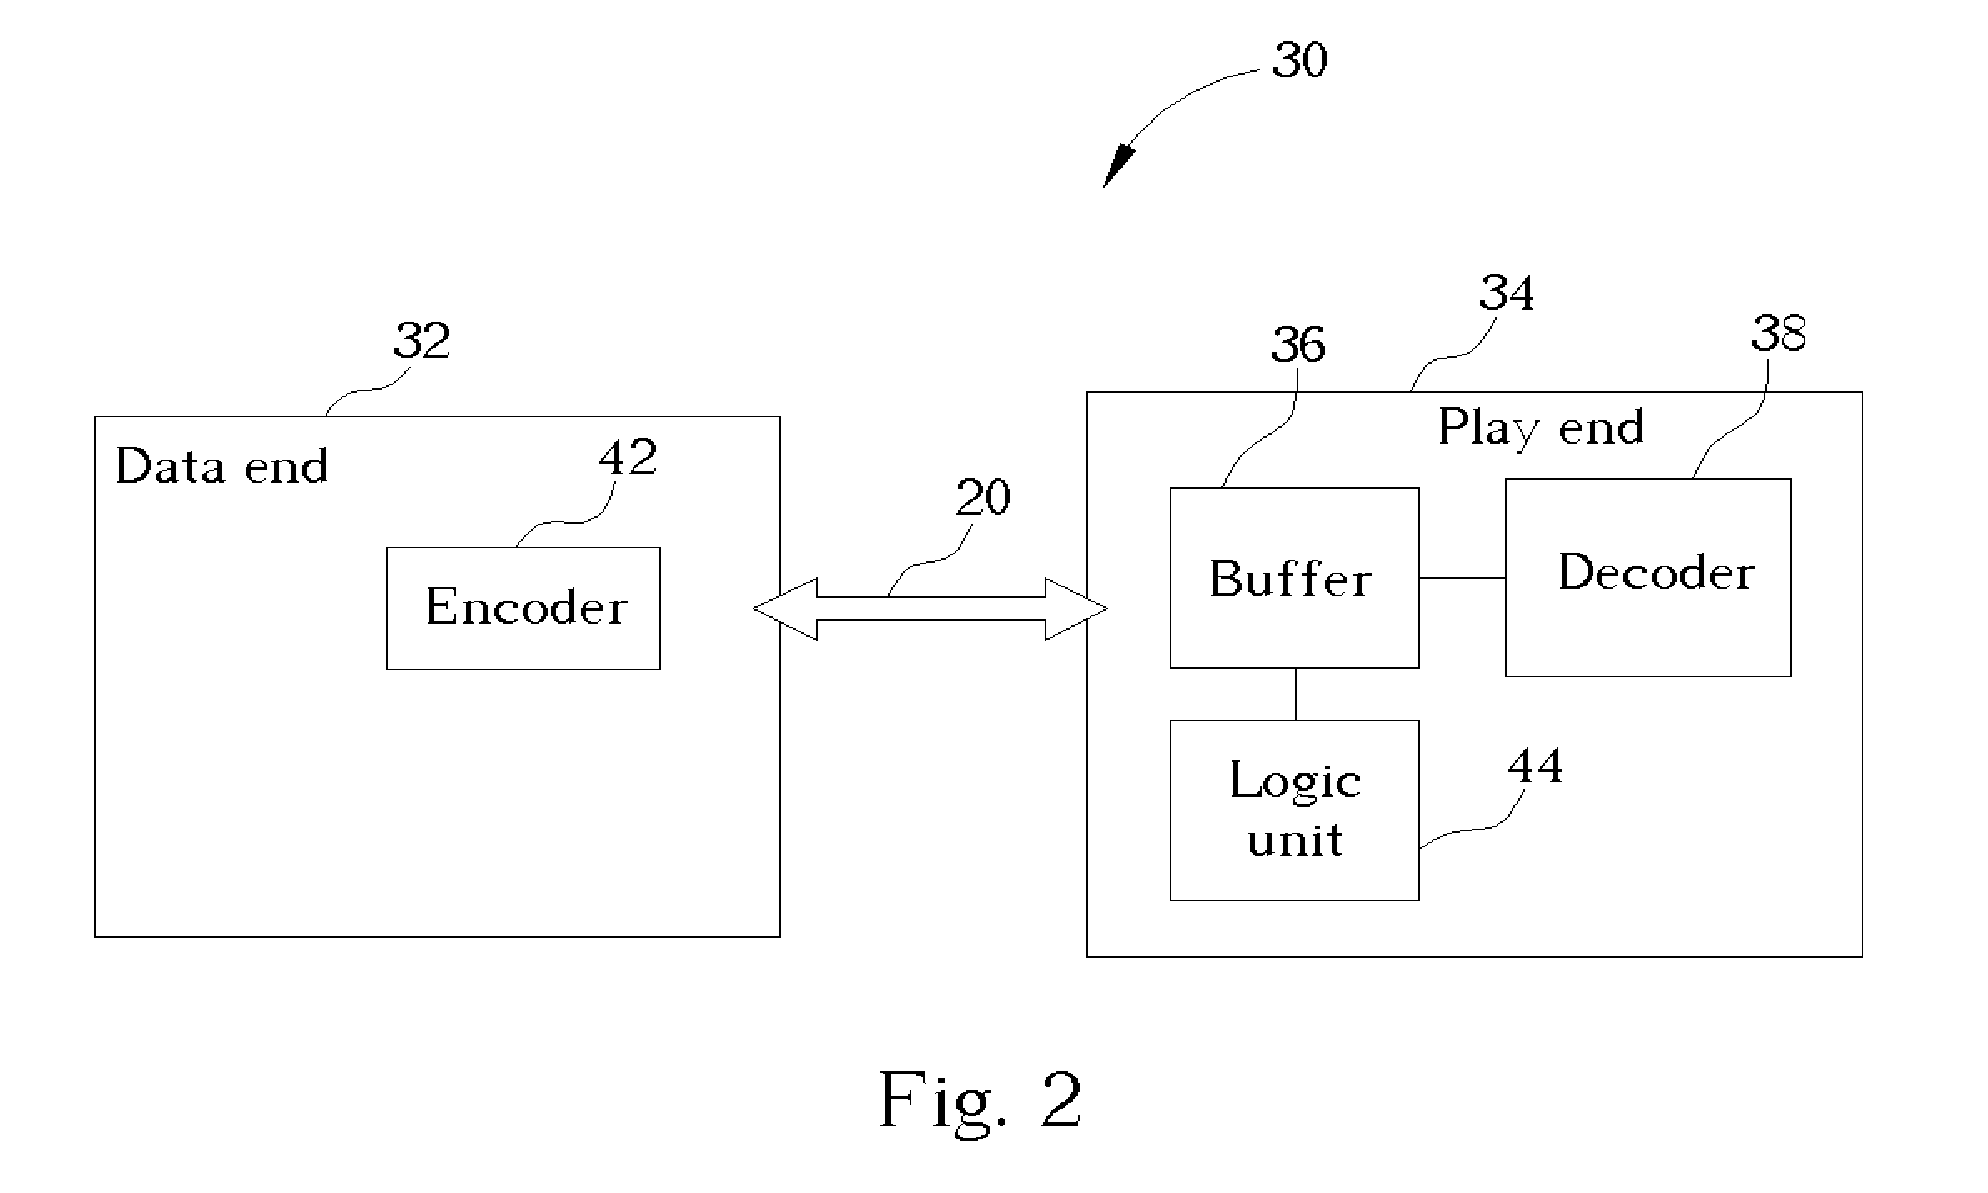 Method of controlling data flow for a media player system